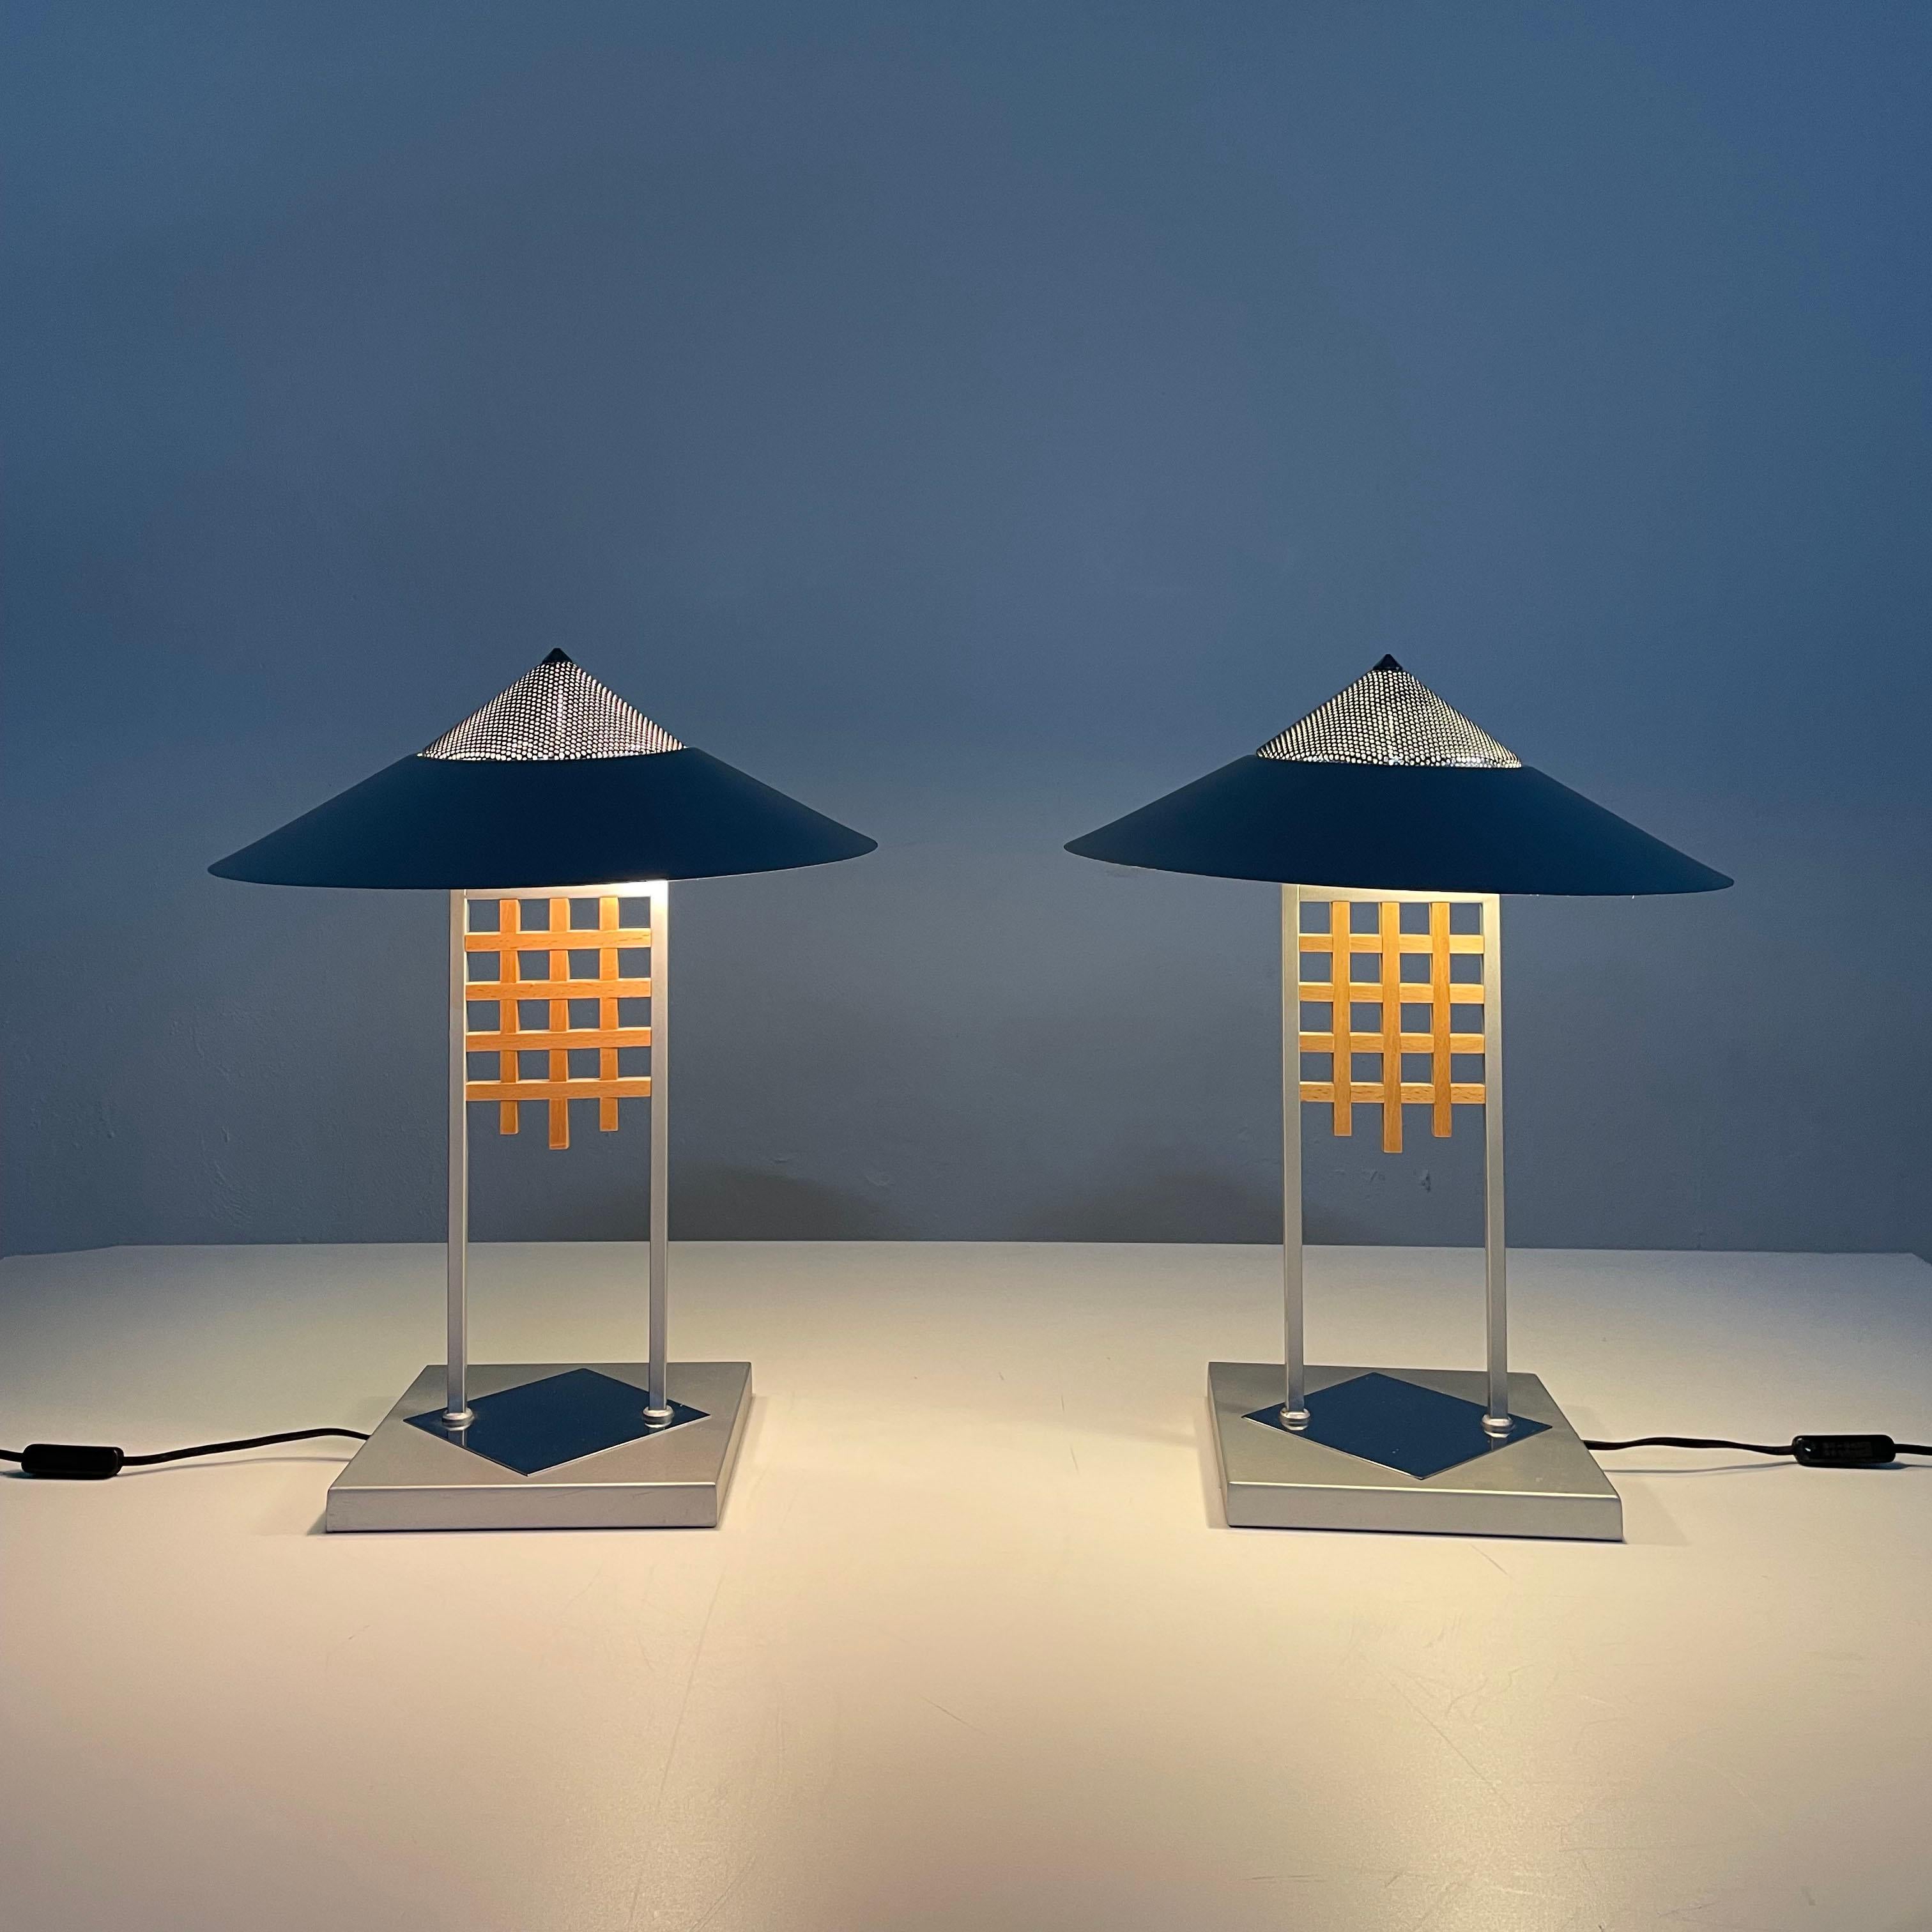 Pair of beautiful metal and table lamps with wooden decoration produced by Slovenian lighting company Sijaj Hrastnik in the 1980's / 1990's

The Slovenian company Sijaj Hrastnik was known in Former Yugoslavia for the great quality of production and